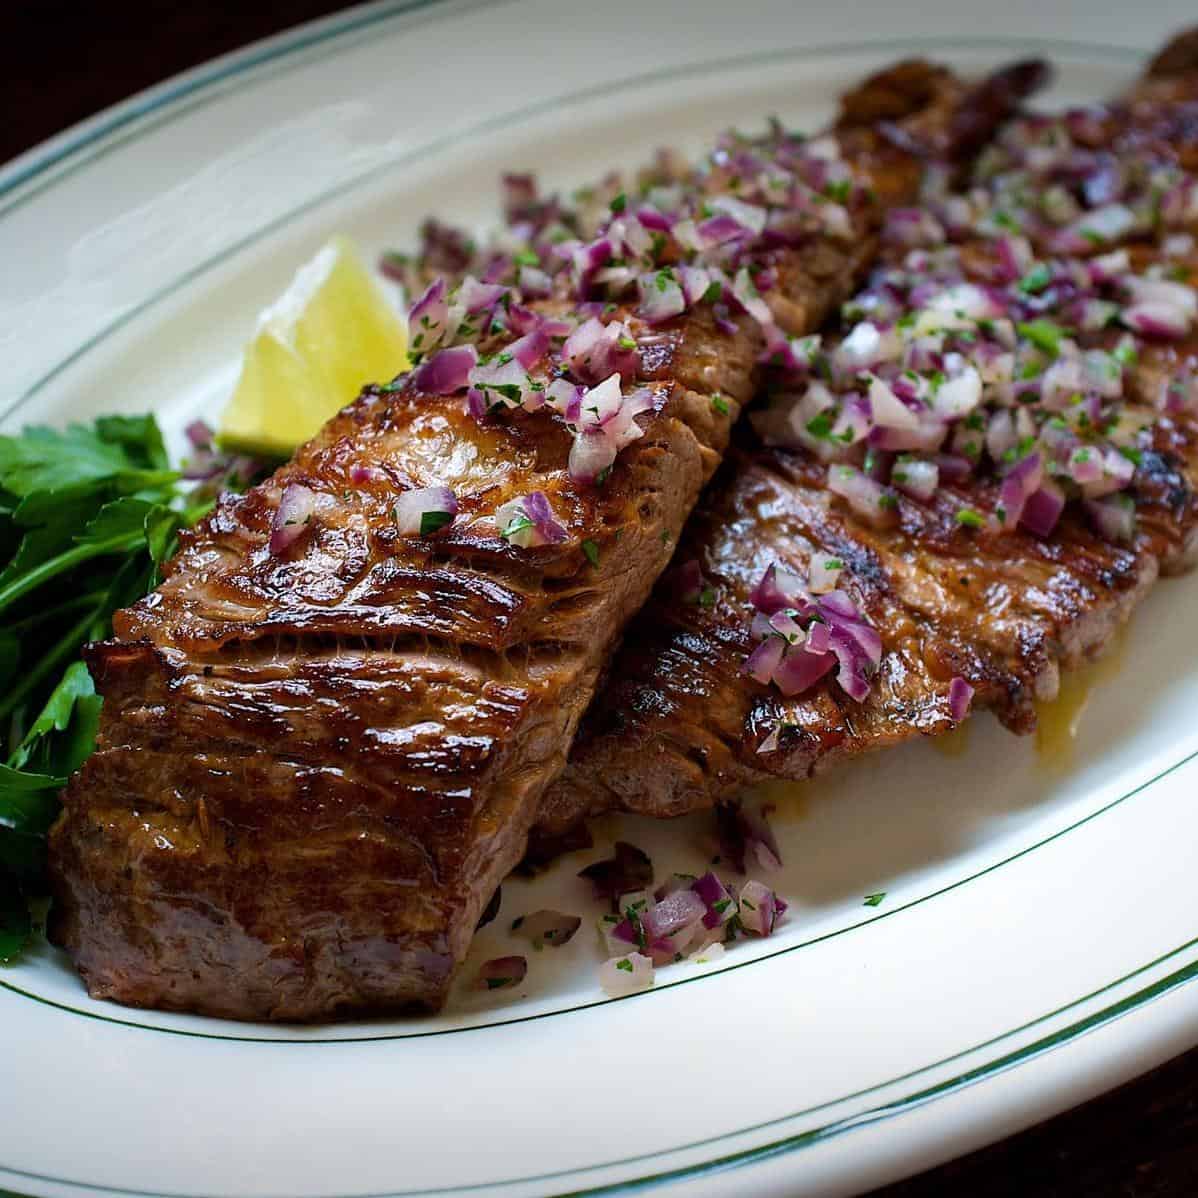  Take a trip to Havana without leaving your backyard with this delicious grilled steak.